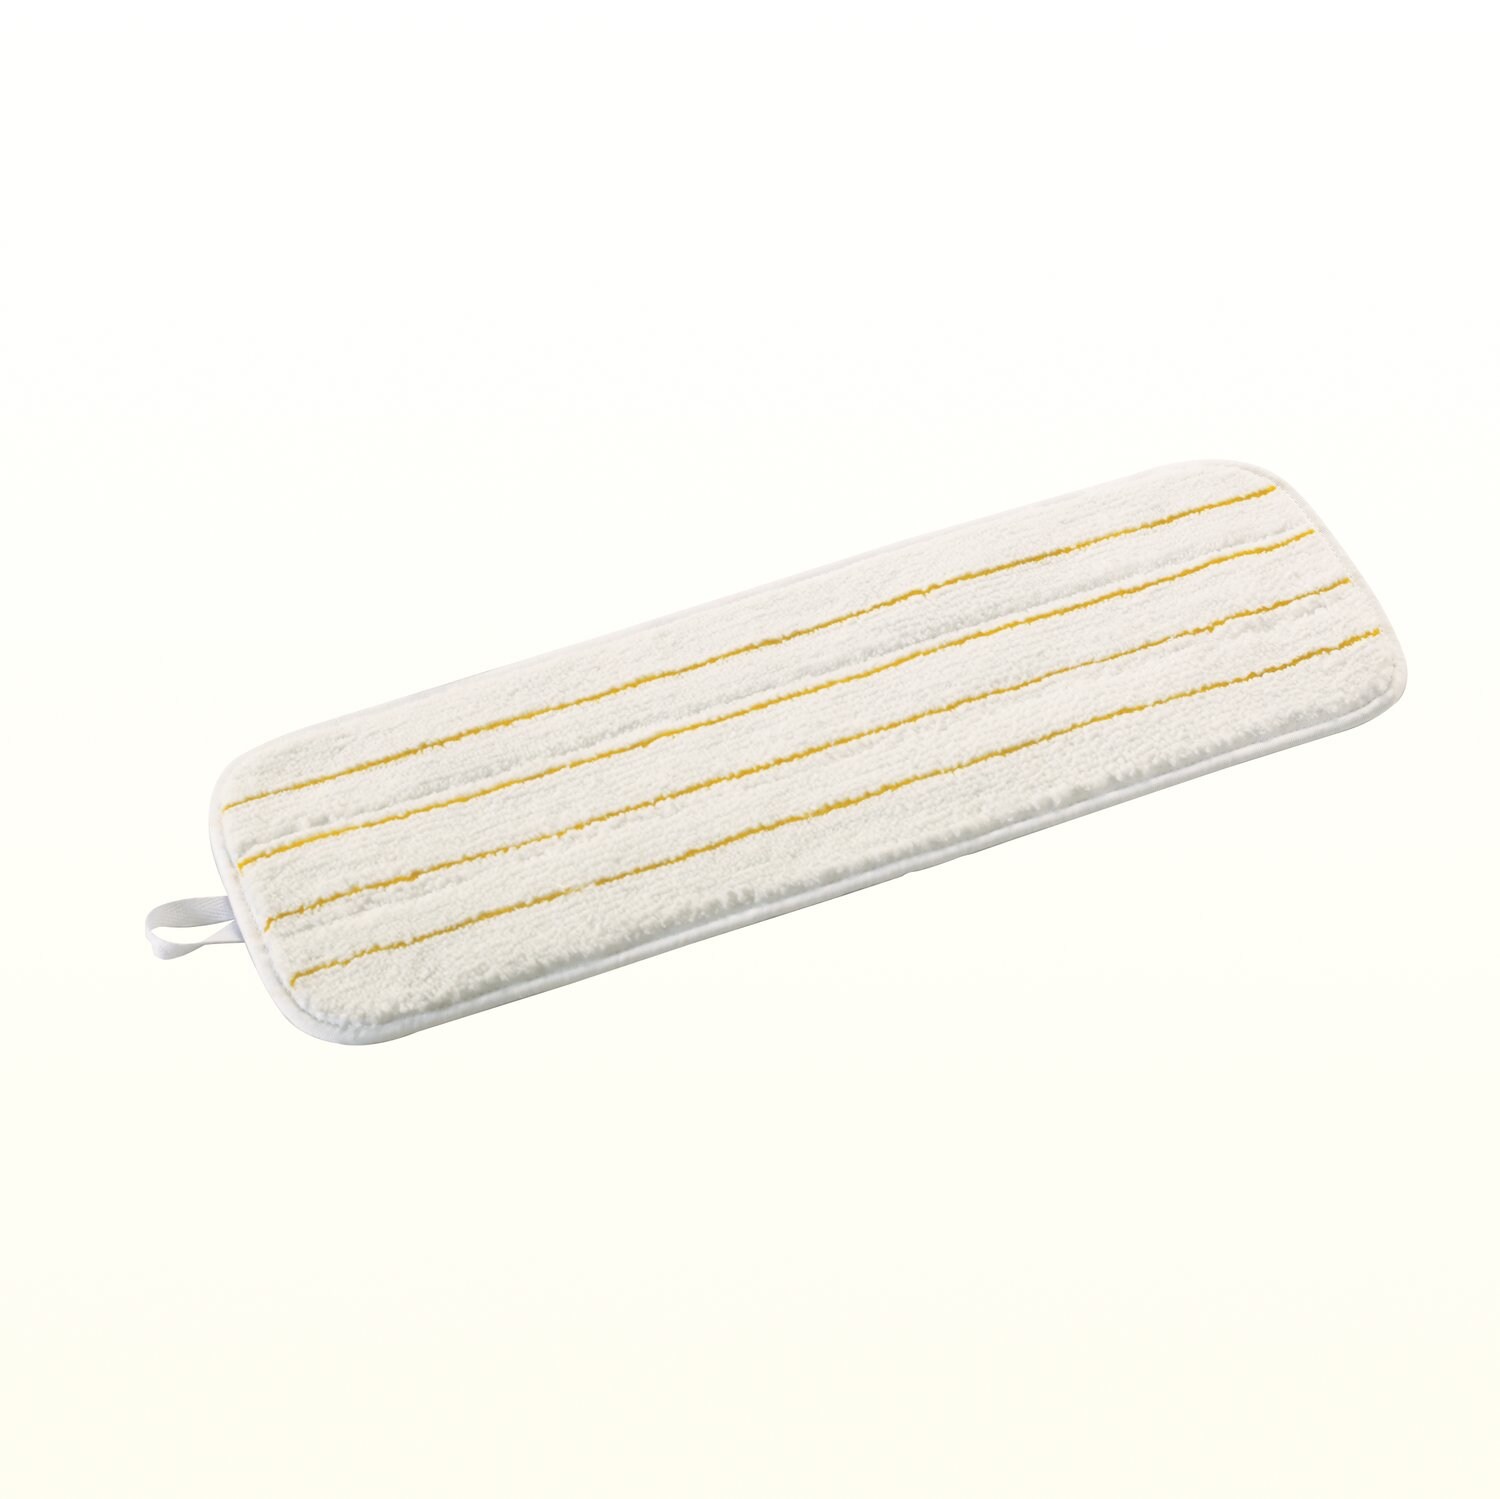 7000126809 - 3M Easy Shine Applicator Pad, White with Yellow Stripes, 24 in, 10/case